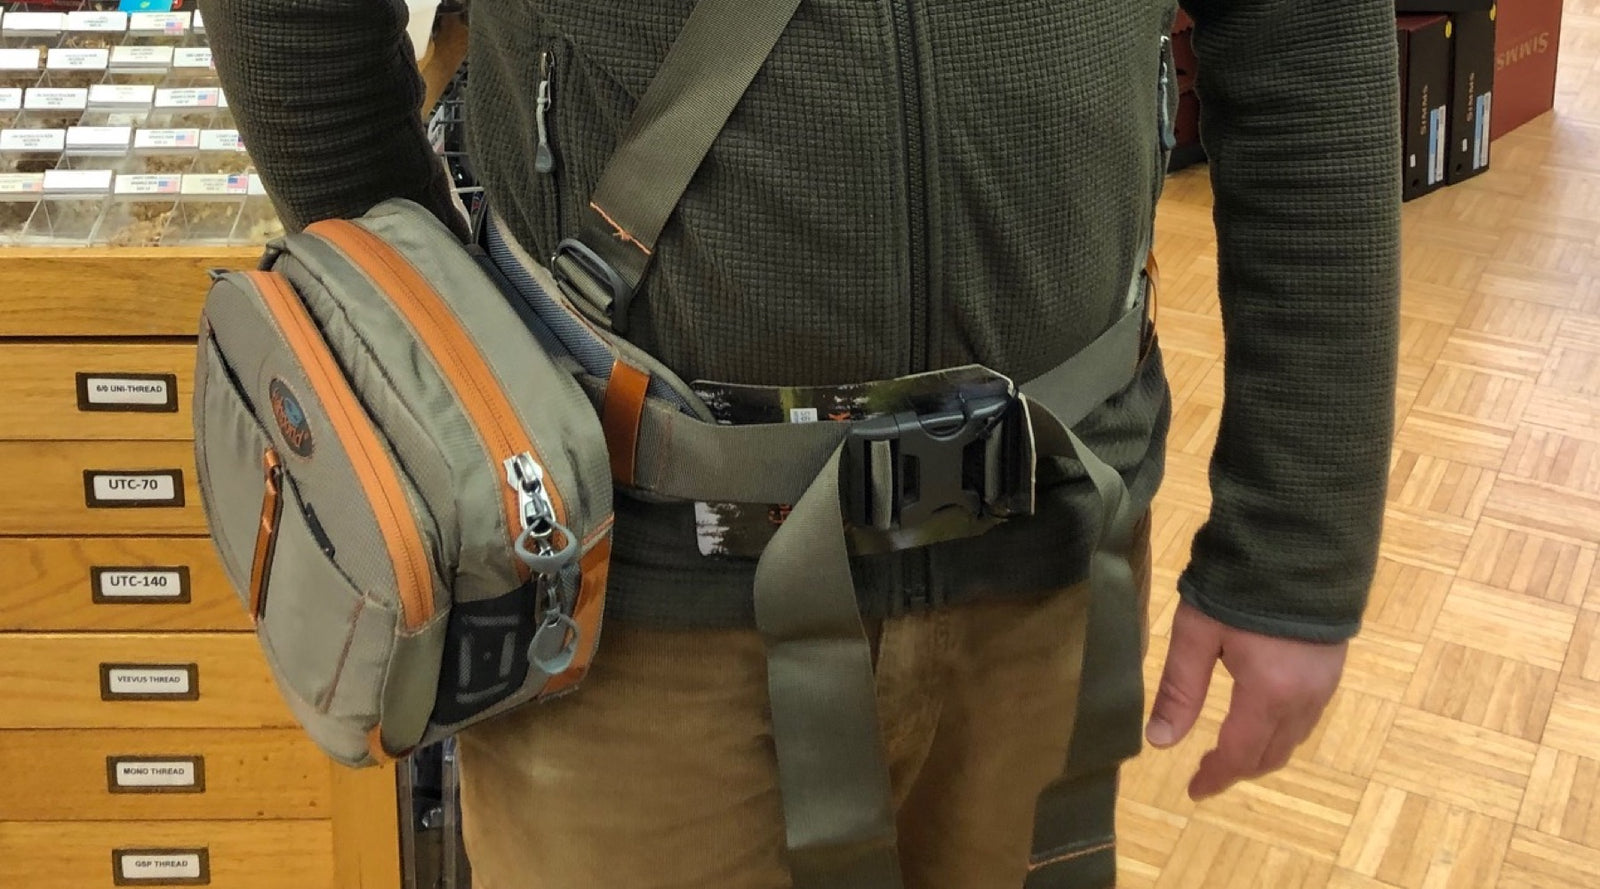 Gear Review: The Fishpond Switchback Belt System - The Compleat Angler